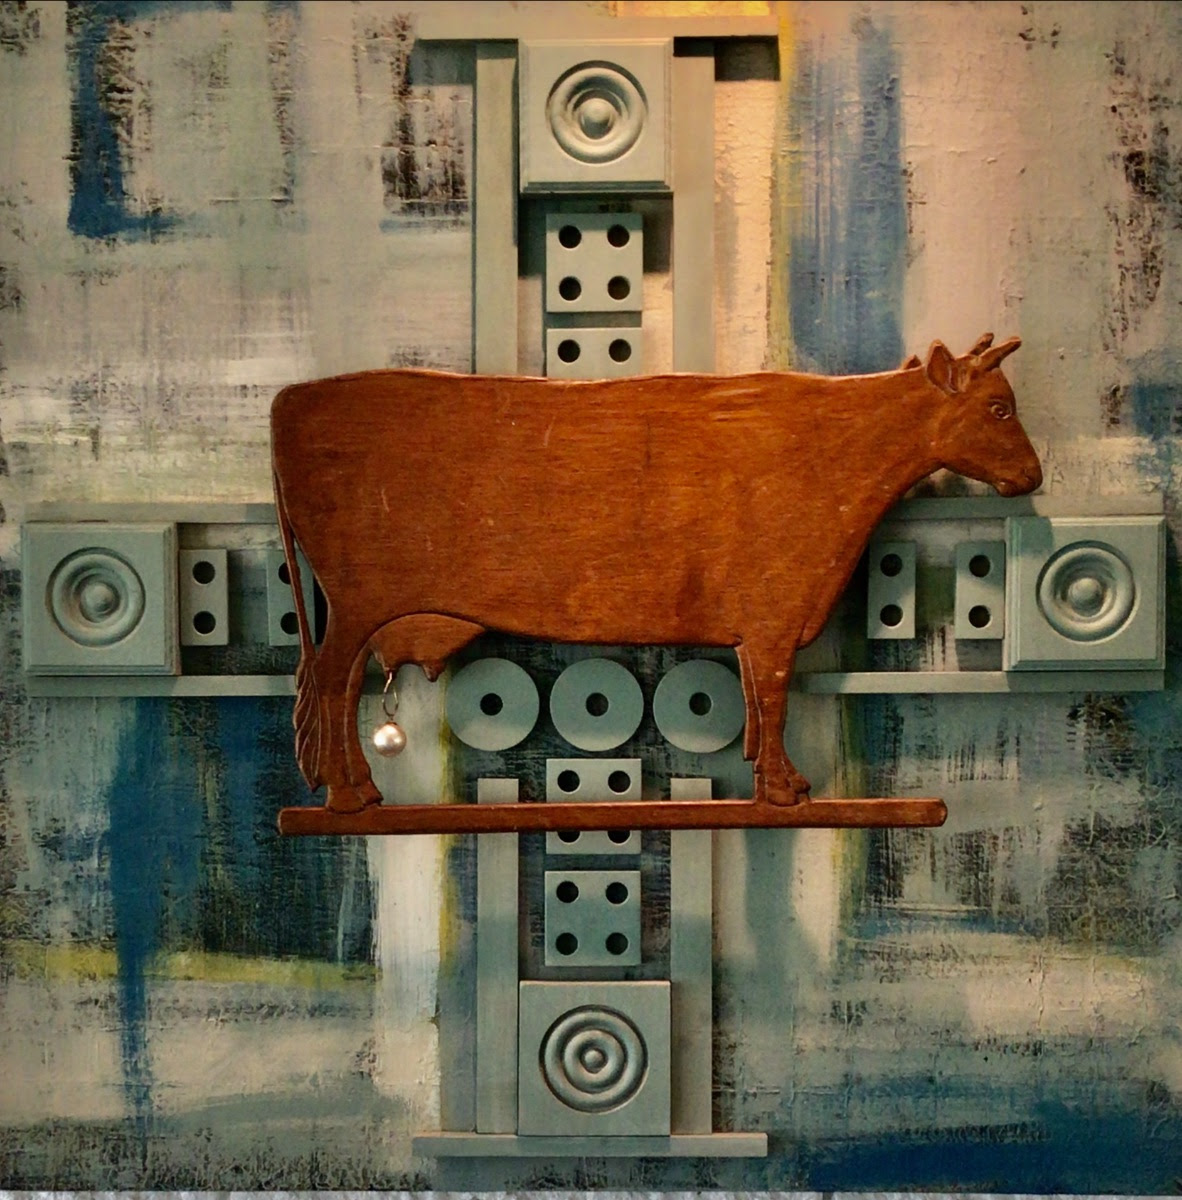  Cow with a Pearl Nipple Ring - 30”x 30” Mixed Media on Wood Panel - Private Collection, Reading. Pa.